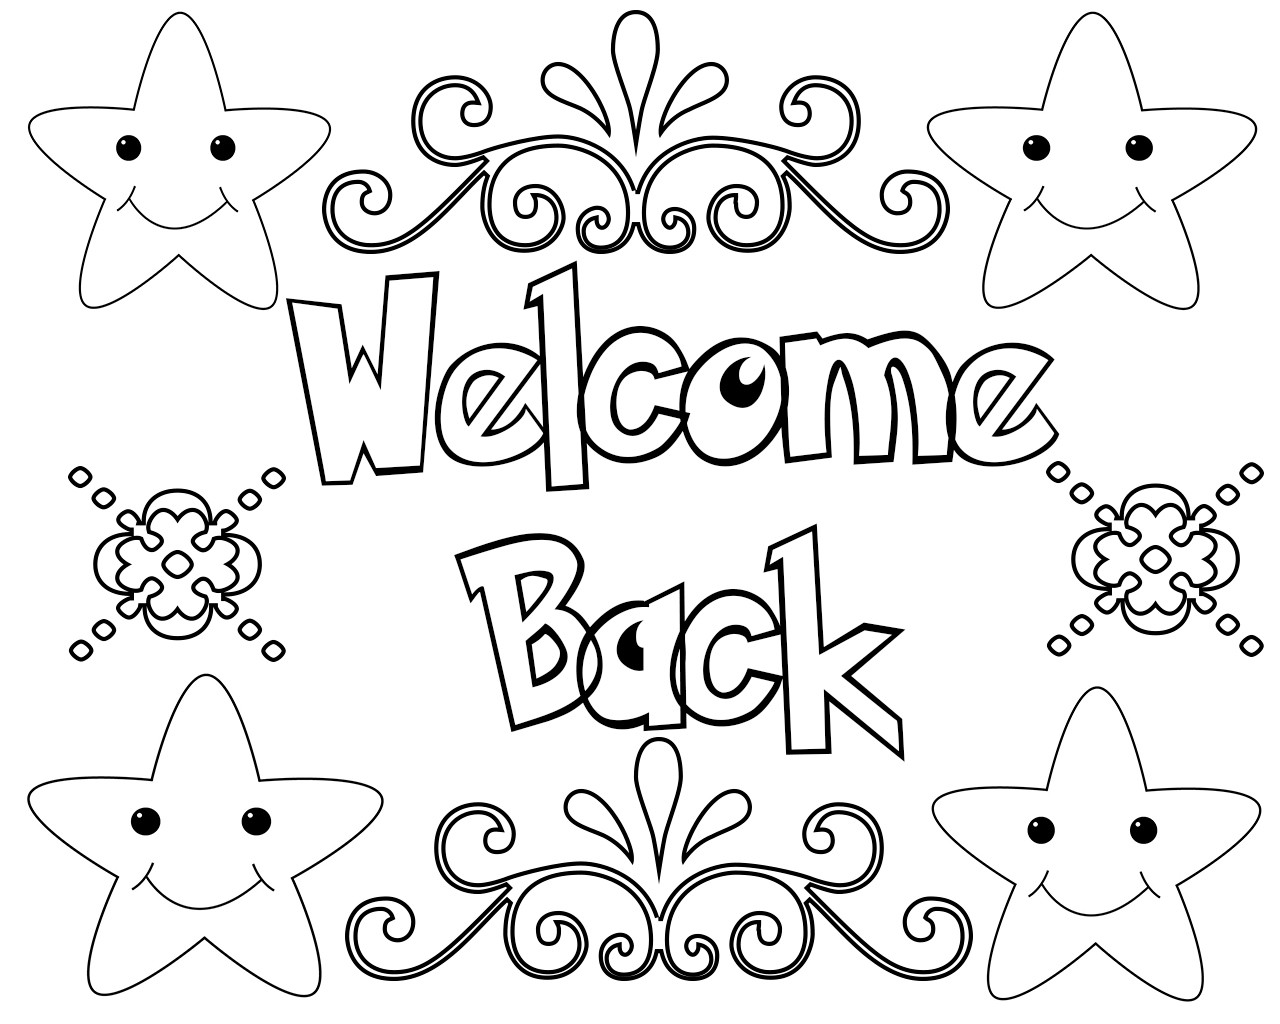 Welcome Back Coloring Pages
 Free Coloring Pages For Kids and Adults